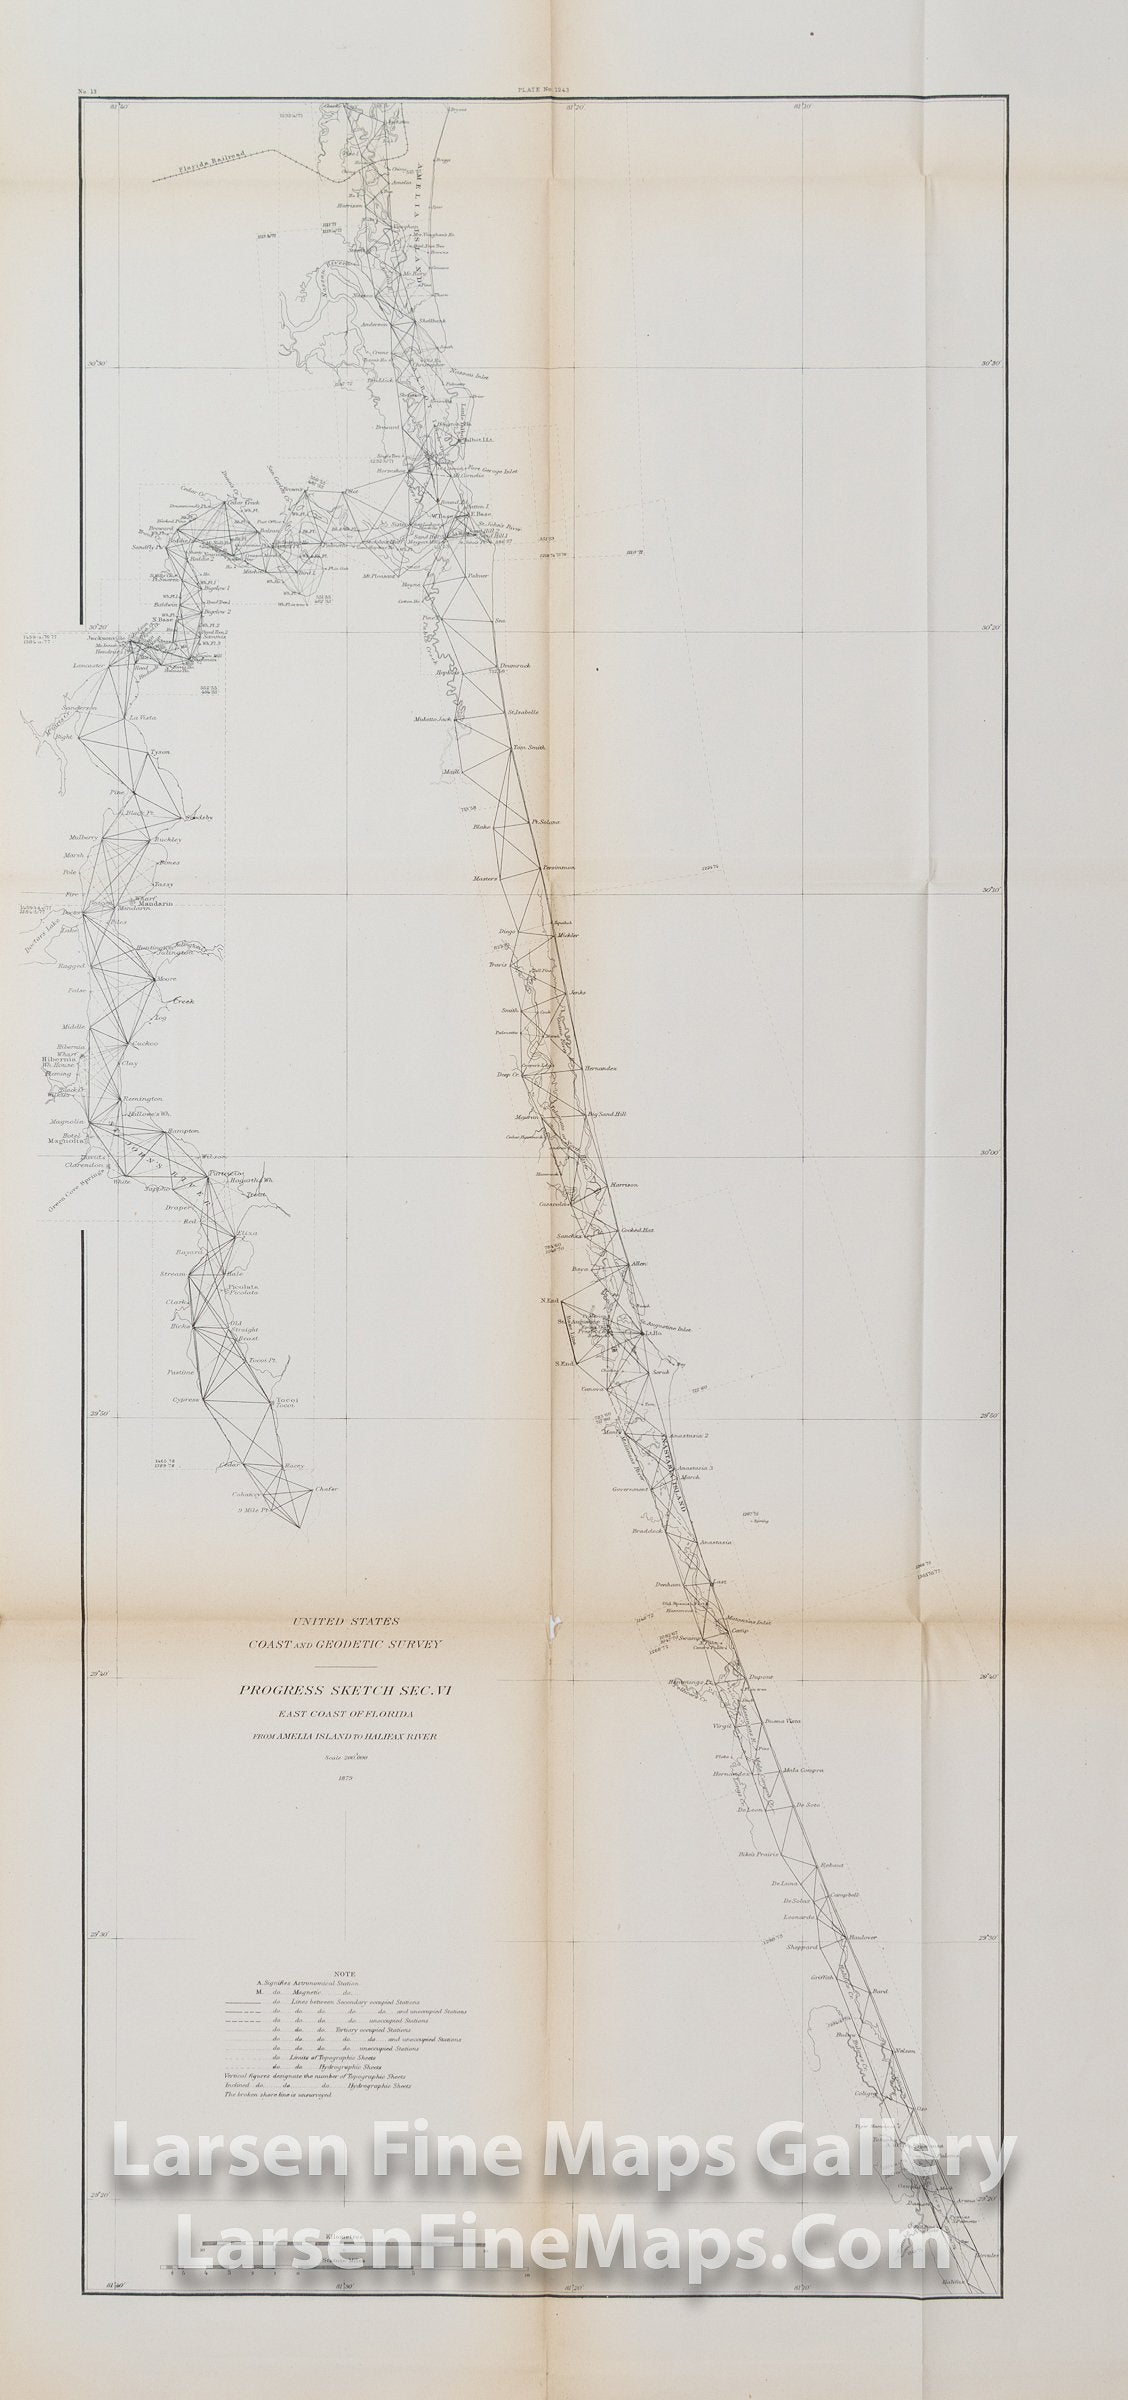 Sketch Showing the Progress of the Survey in Section VI. East Coast of Florida, Amelia Island to Halifax River